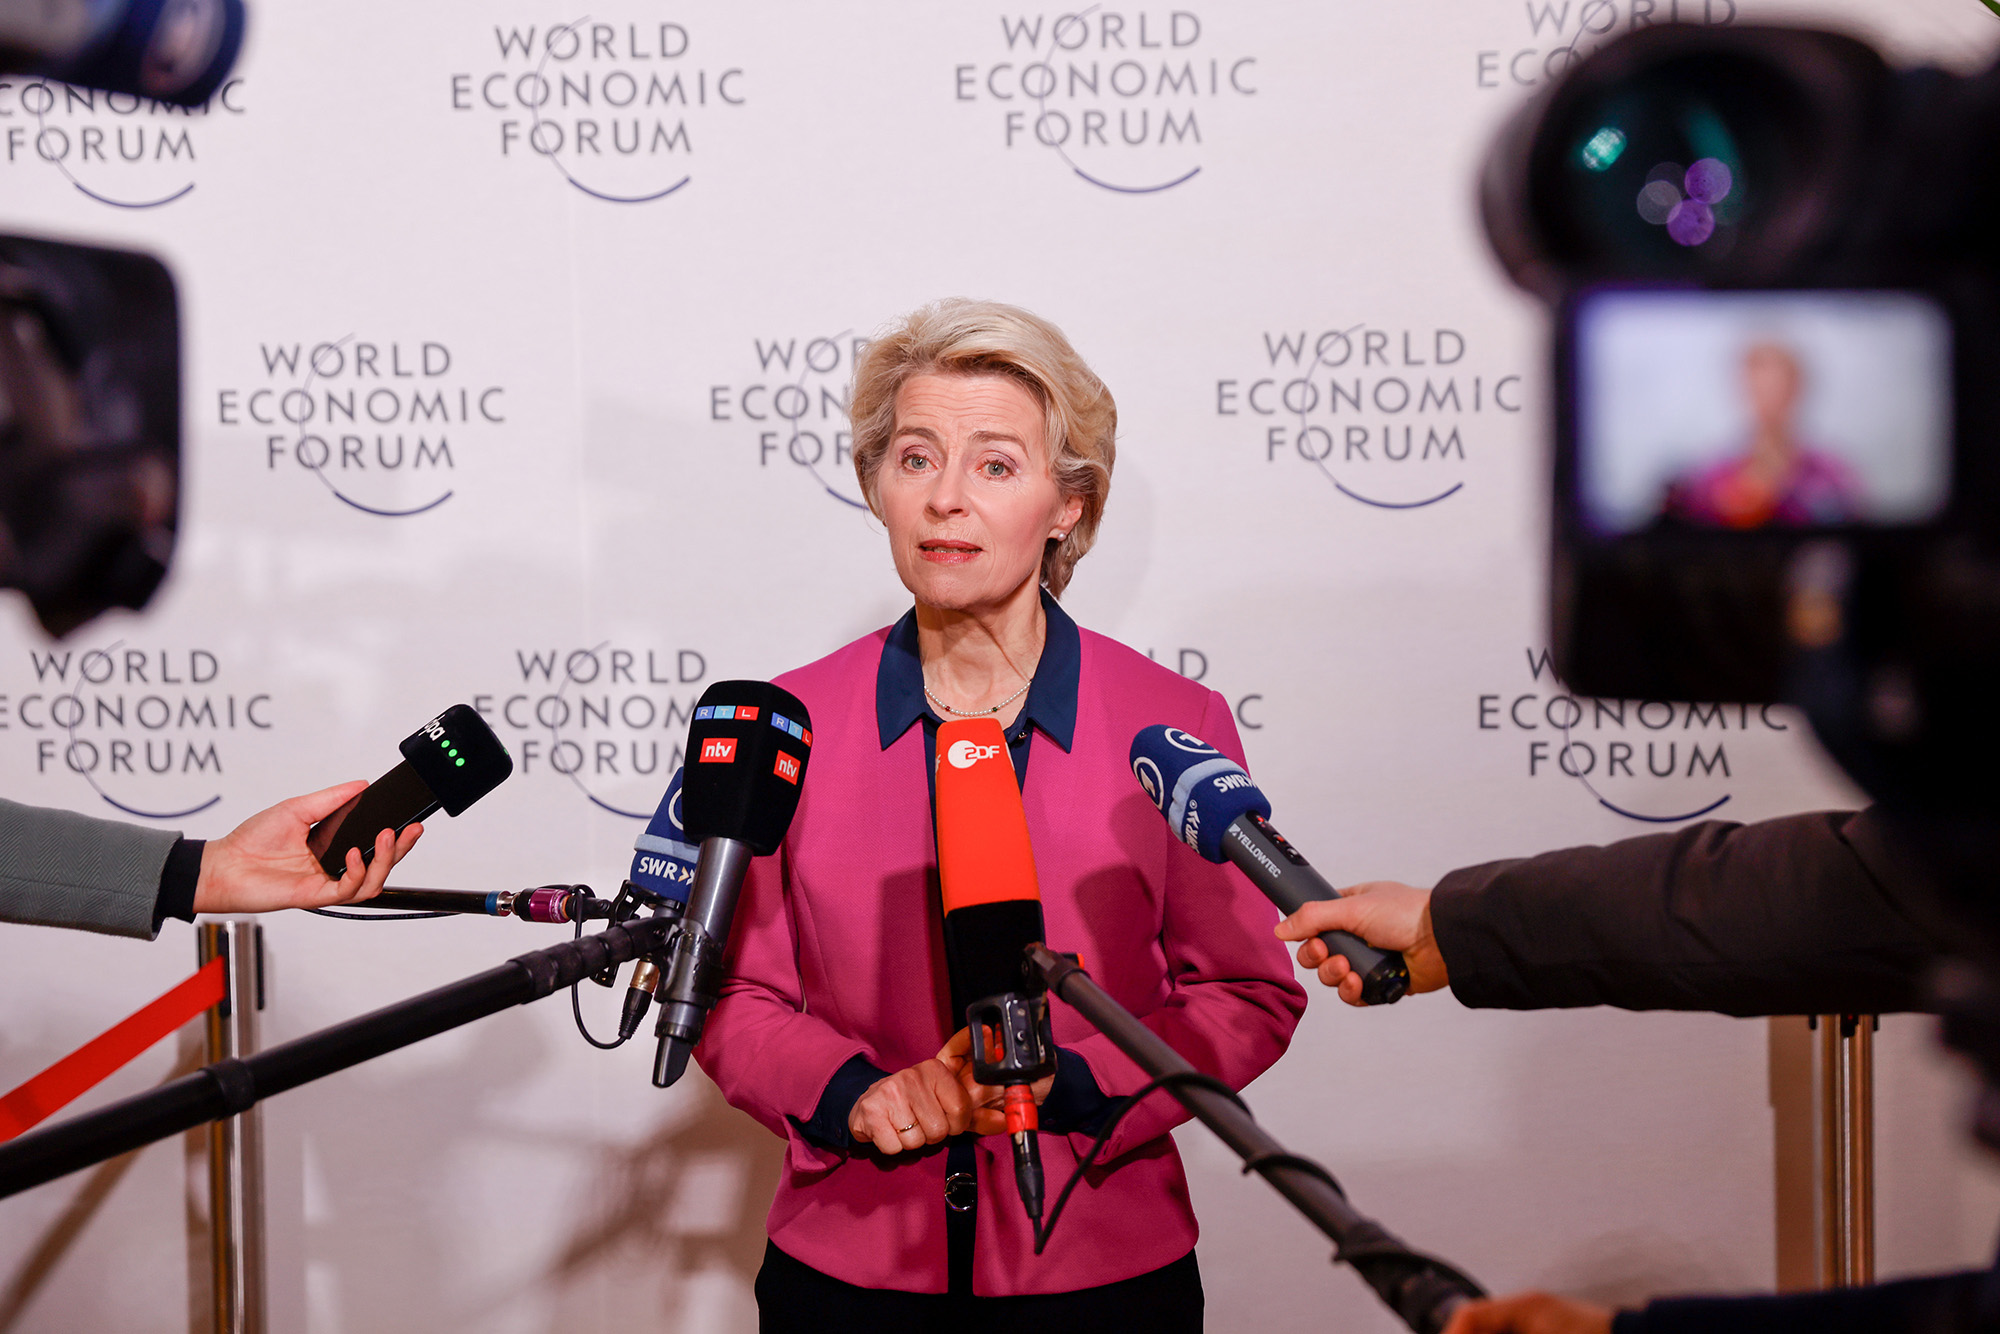 Ursula von der Leyen, president of the European Commission, speaks to reporters on the opening day of the World Economic Forum (WEF) in Davos, Switzerland, on January 17.